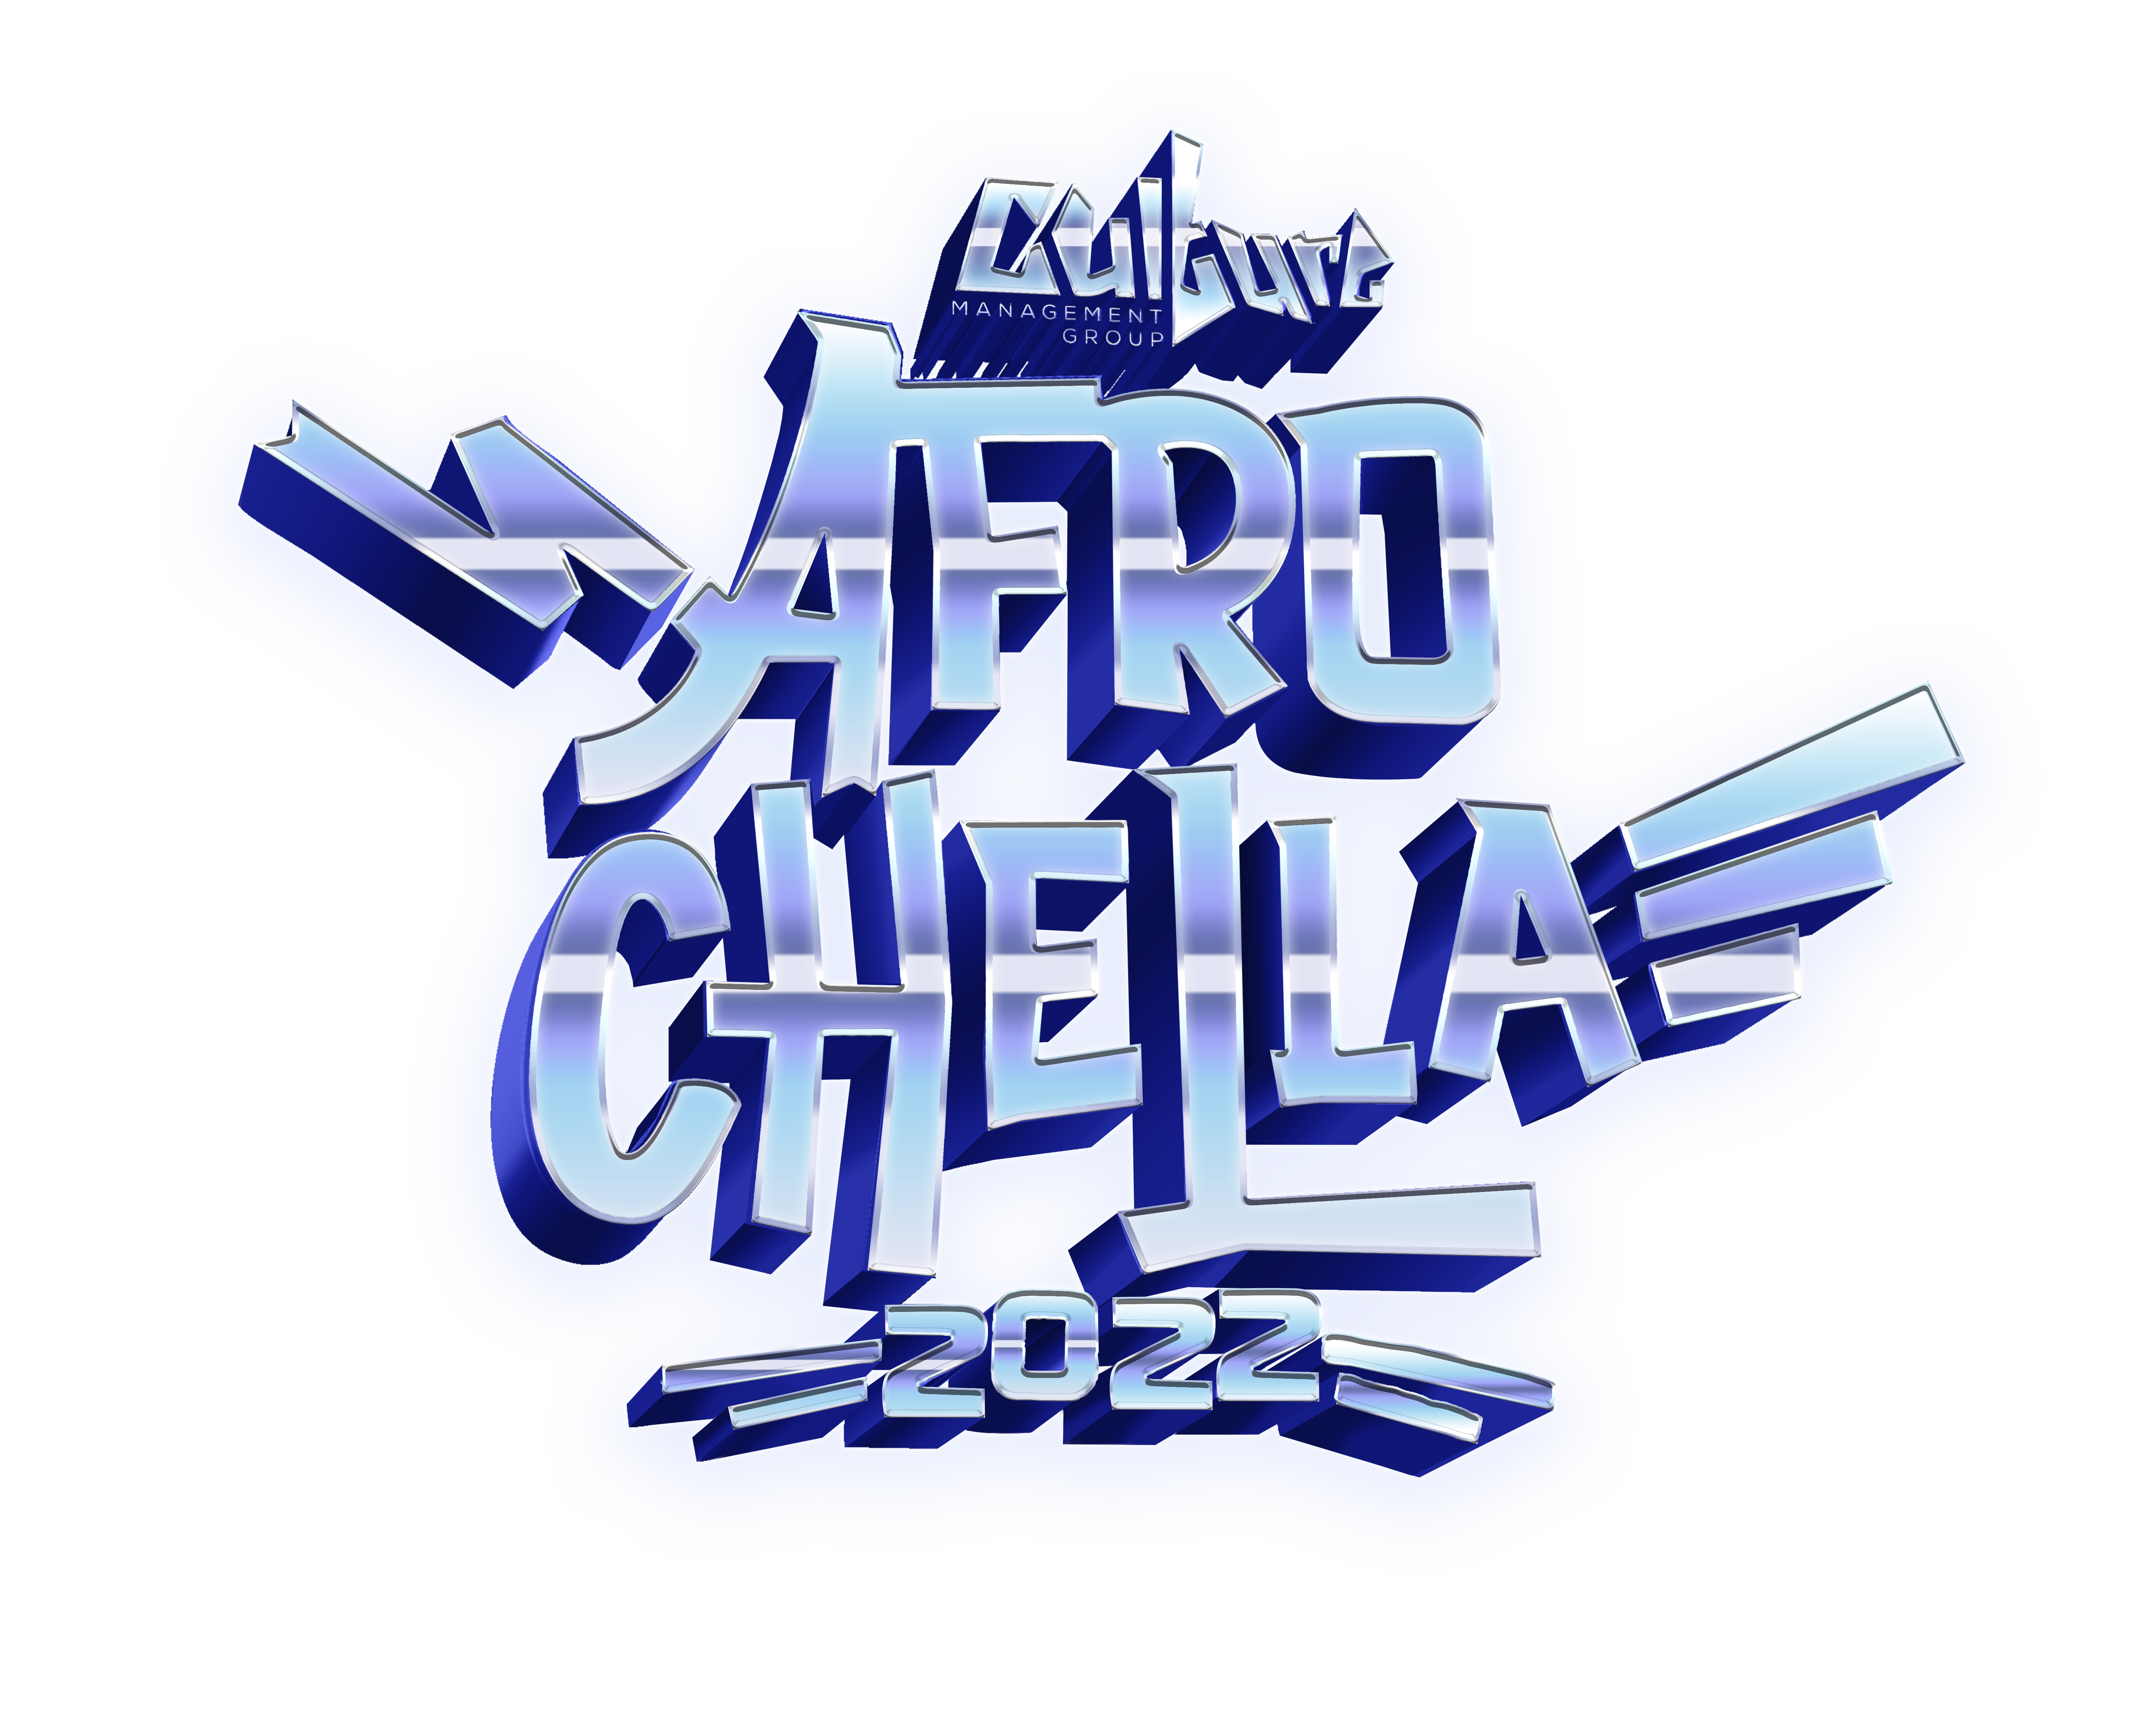 Read more about the article Burna Boy and Stonebwoy Announced as Headliners for Afrochella Festival